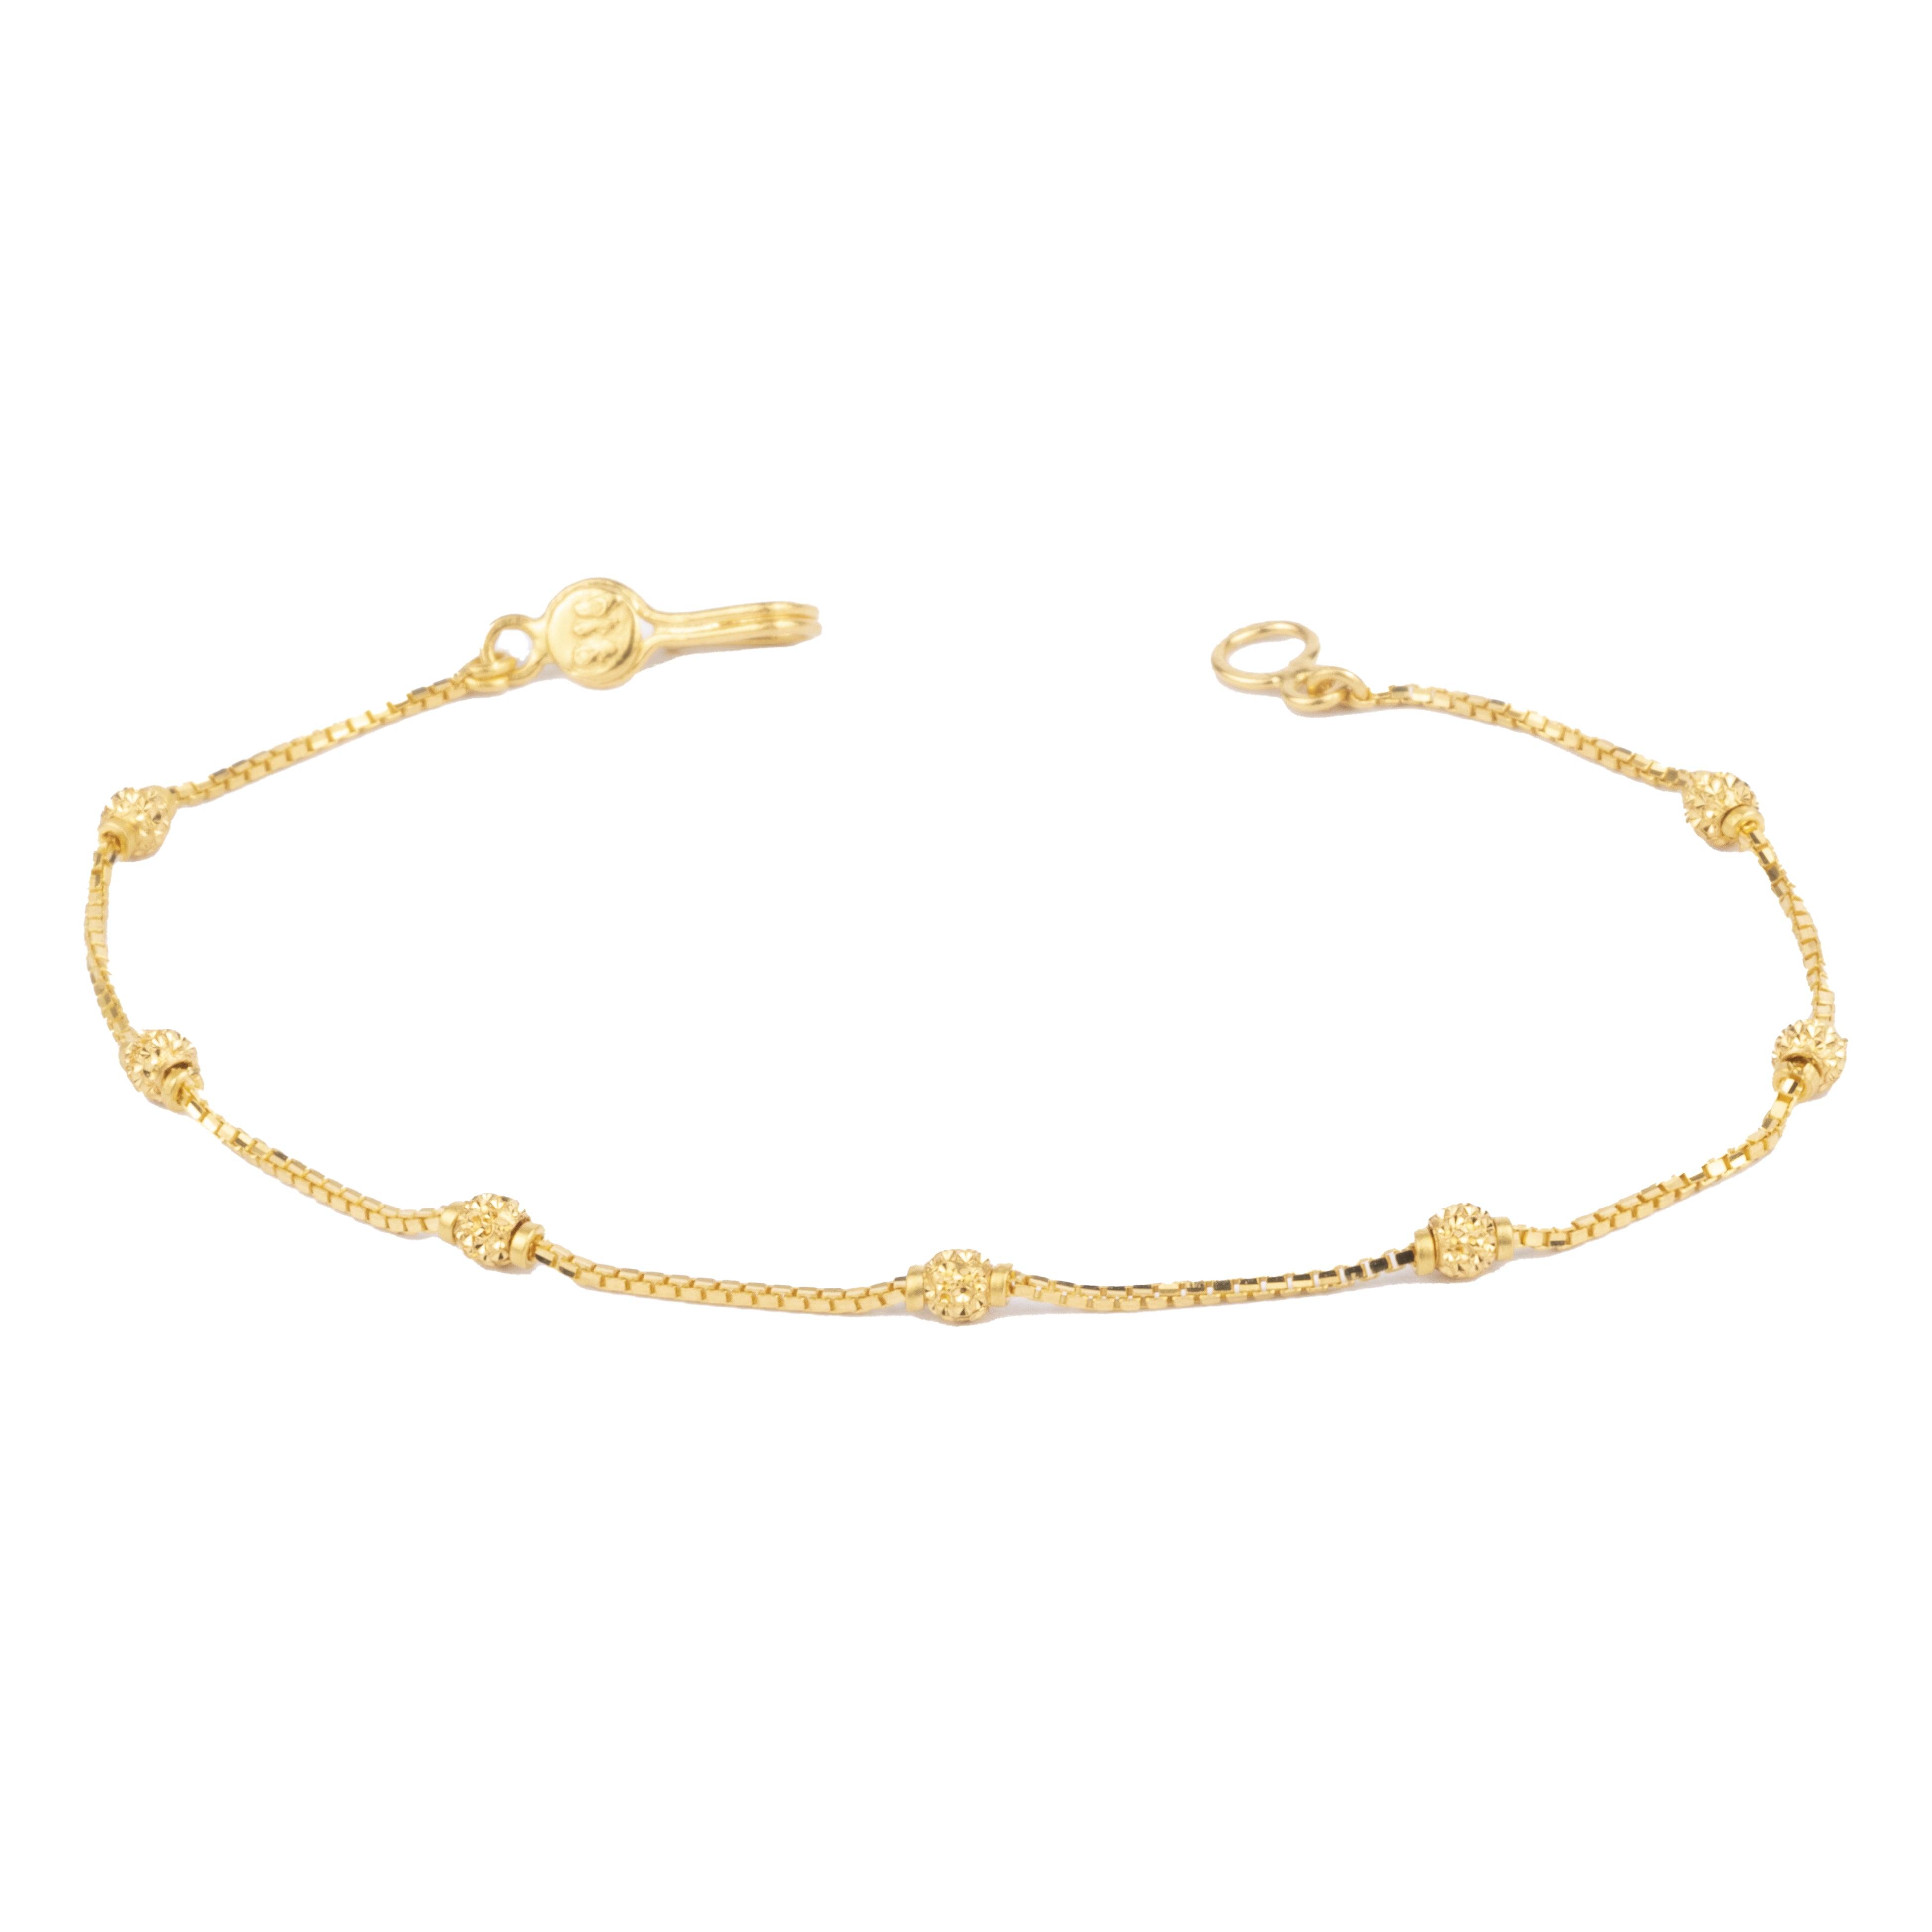 22ct Gold Box Chain Bracelet with Diamond Cut Beads and Hook Clasp LBR-7125 - Minar Jewellers